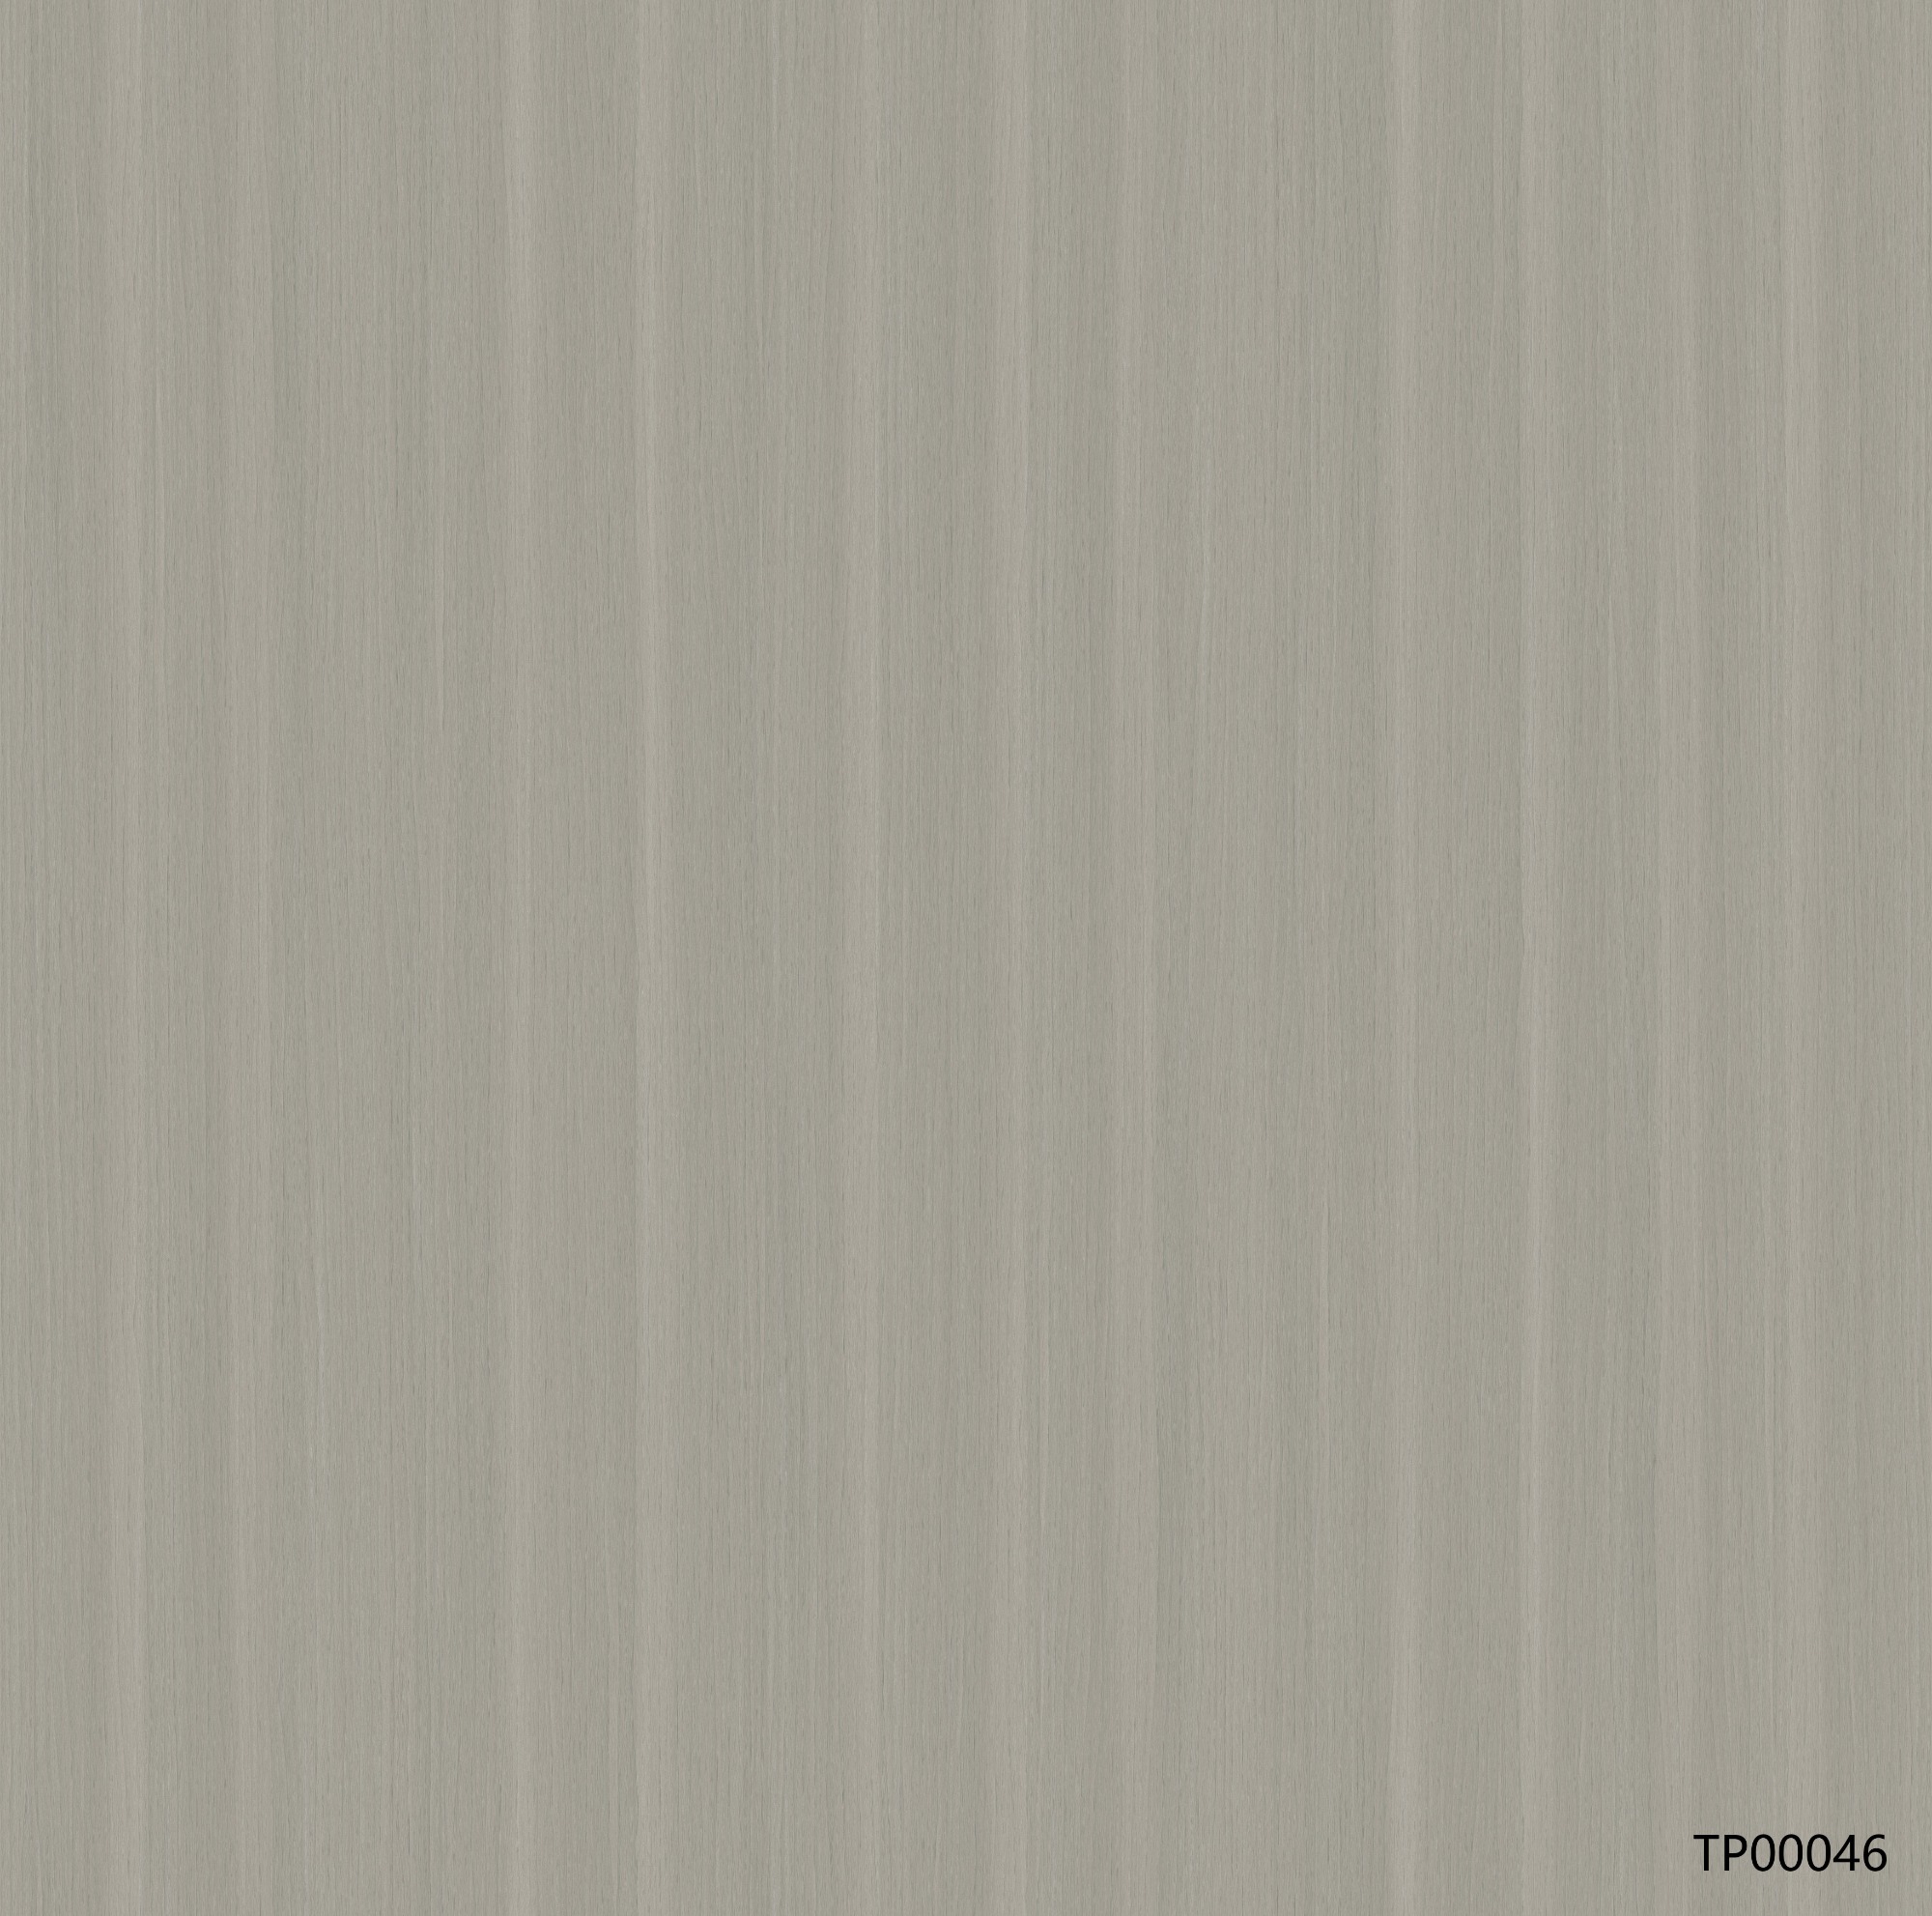 TP00046 Melamine paper with wood grain